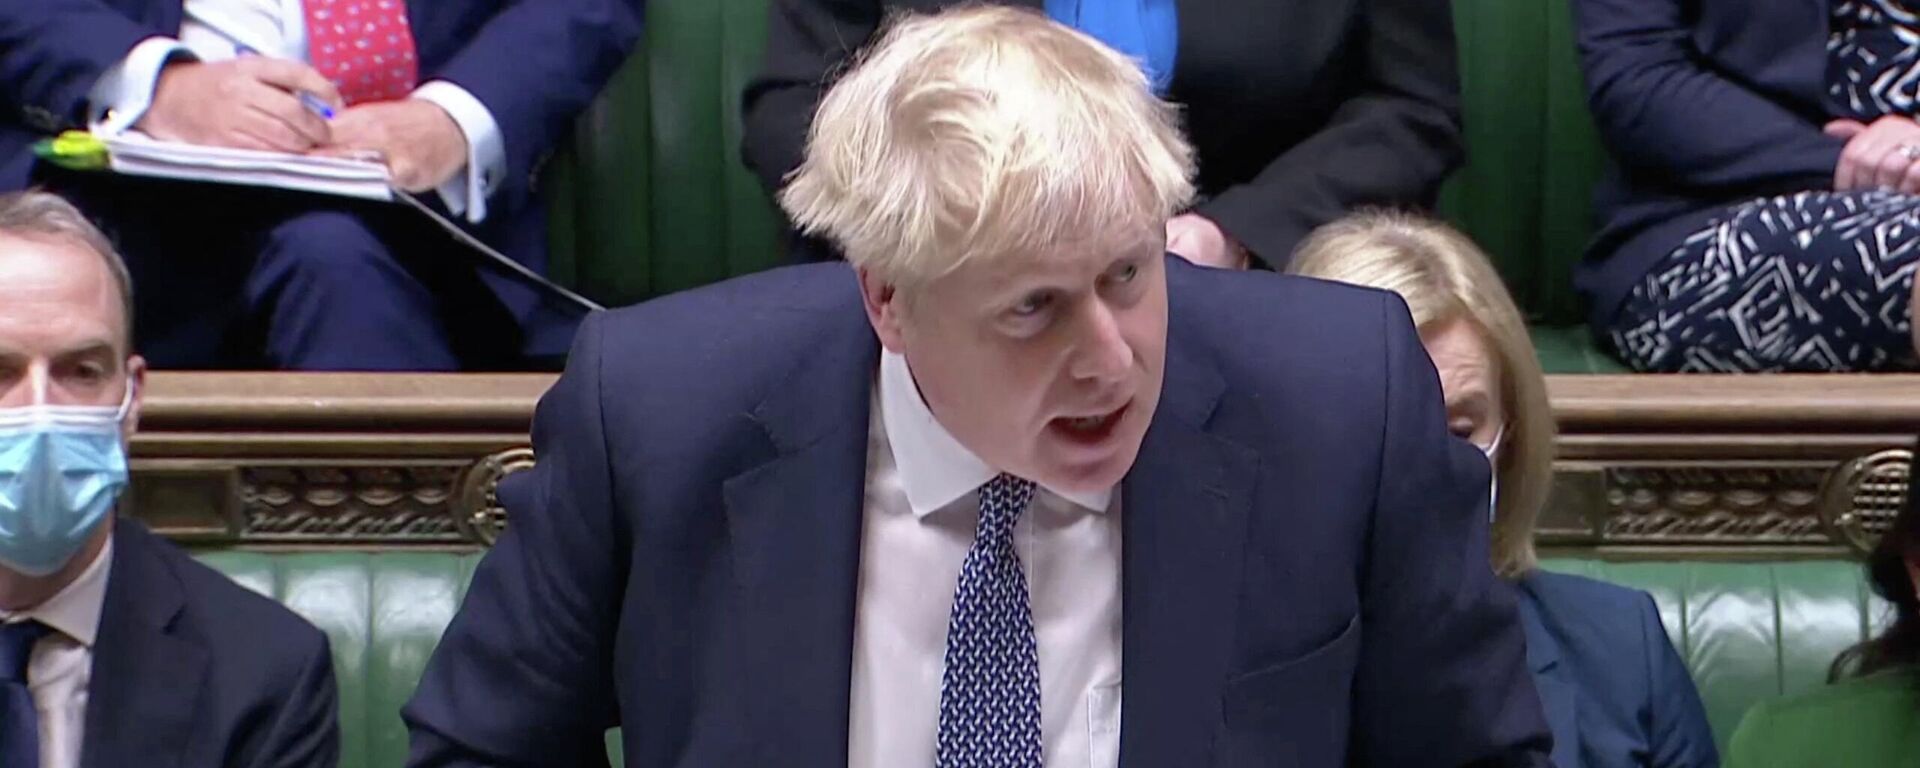 British Prime Minister Boris Johnson speaks during the weekly question time debate at Parliament in London, Britain, January 12, 2022 - Sputnik International, 1920, 12.01.2022